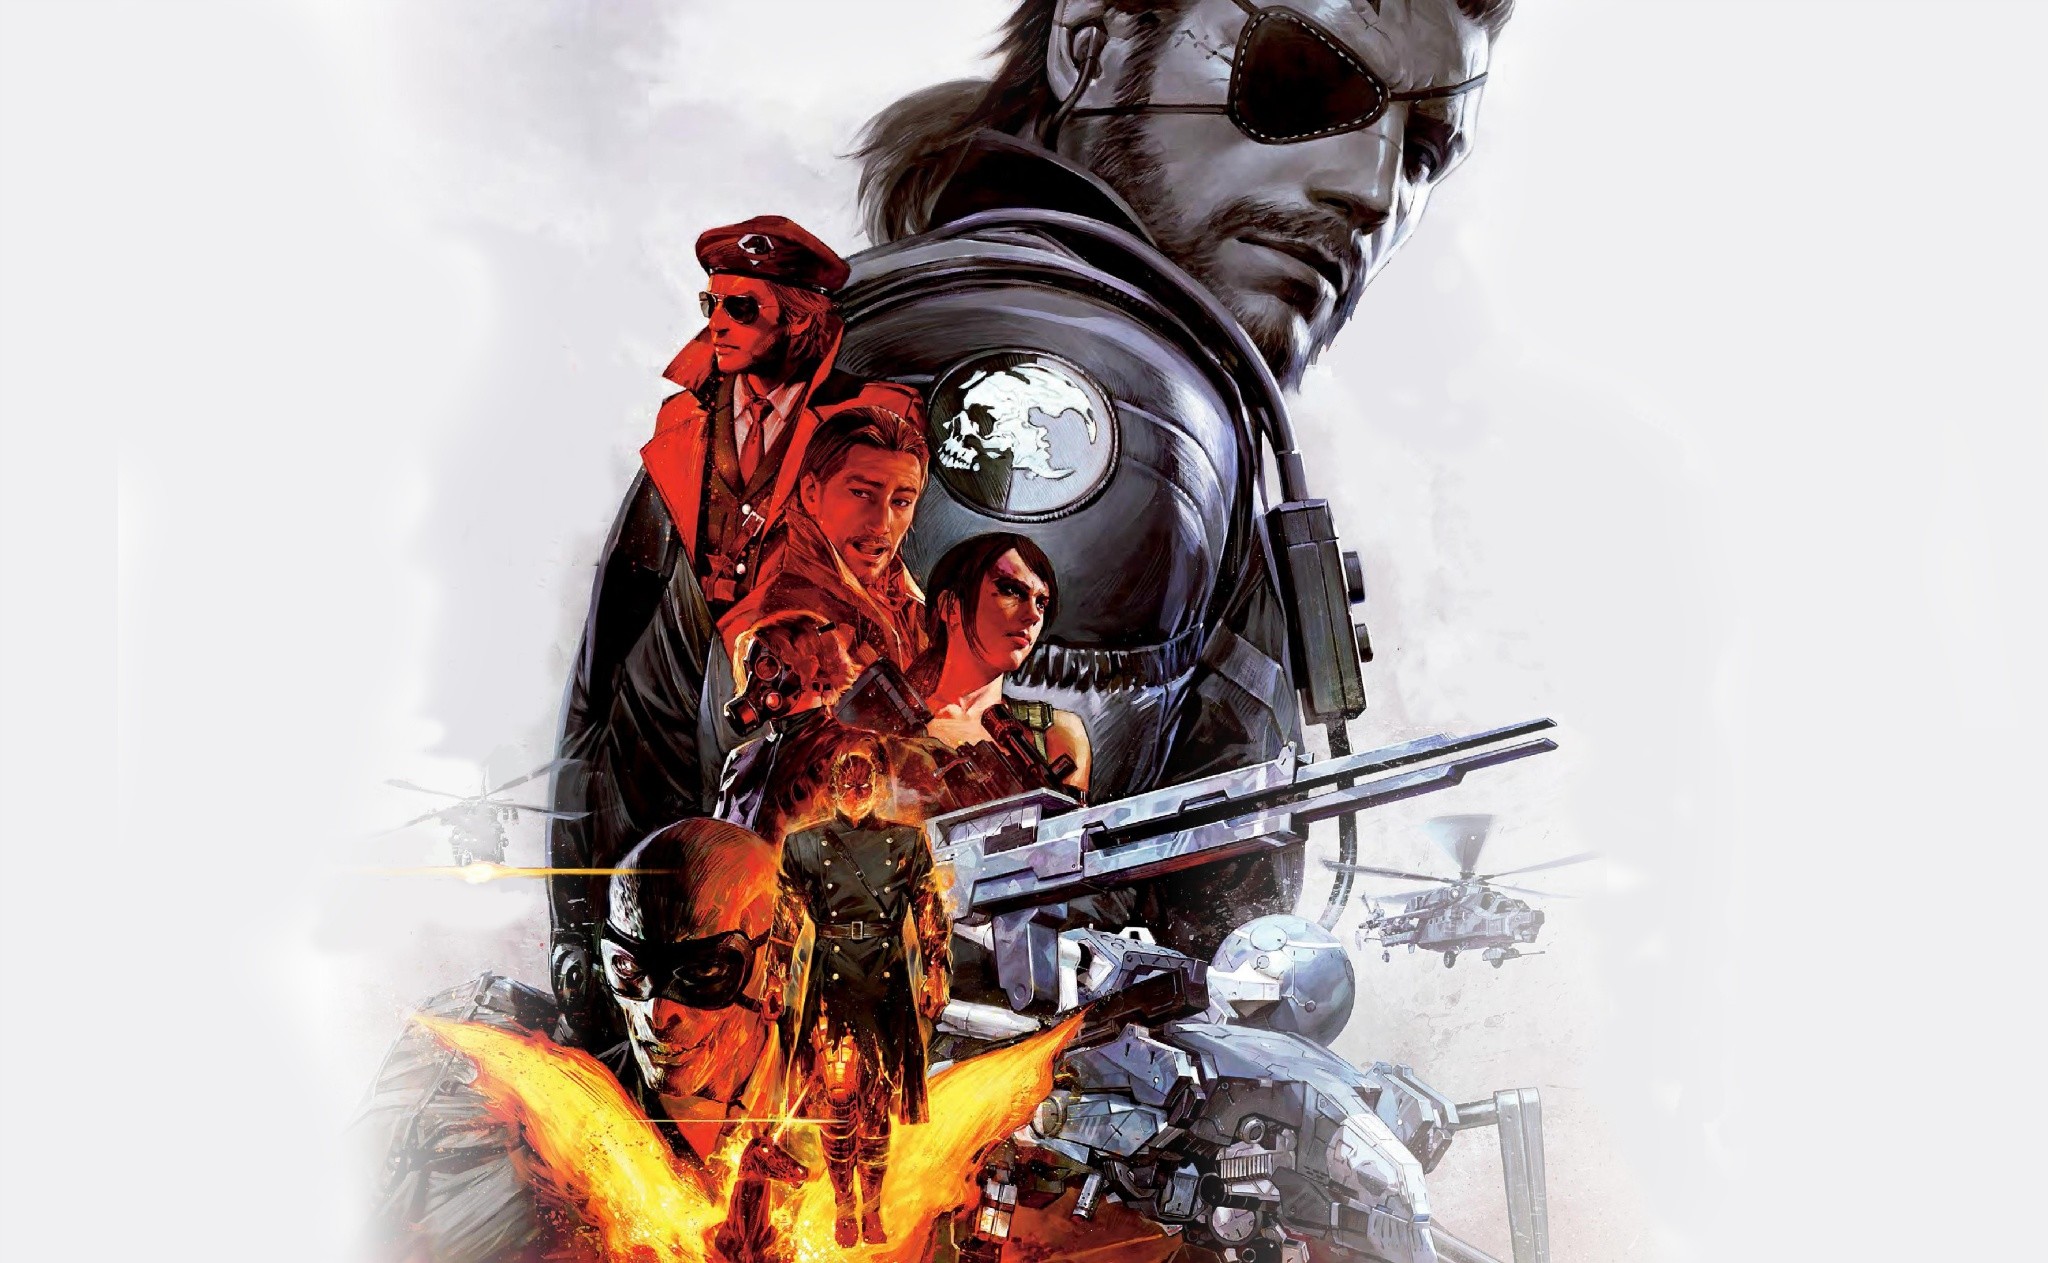 The Top 10 Best Blogs on Metal Gear Solid 5 The Phantom Pain